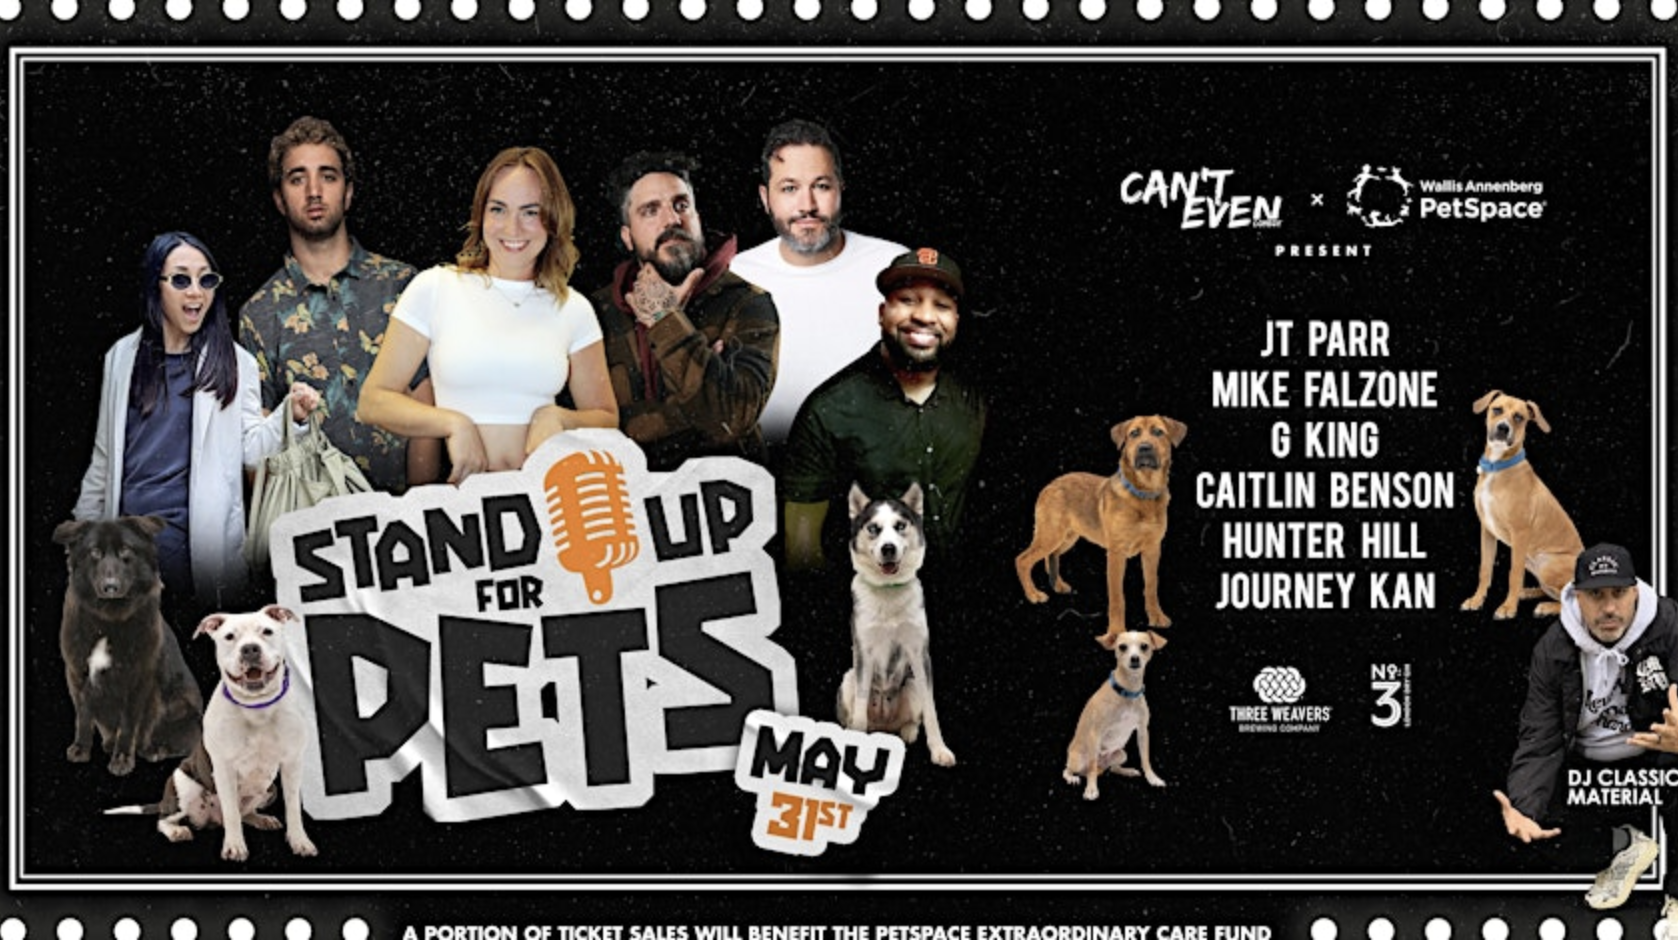 Promotional image for "Stand Up for Pets" comedy show on May 31st. Features several comedians and their pets. Background includes a person in a bear suit and various dogs. Event benefits Wallis Annenberg PetSpace.